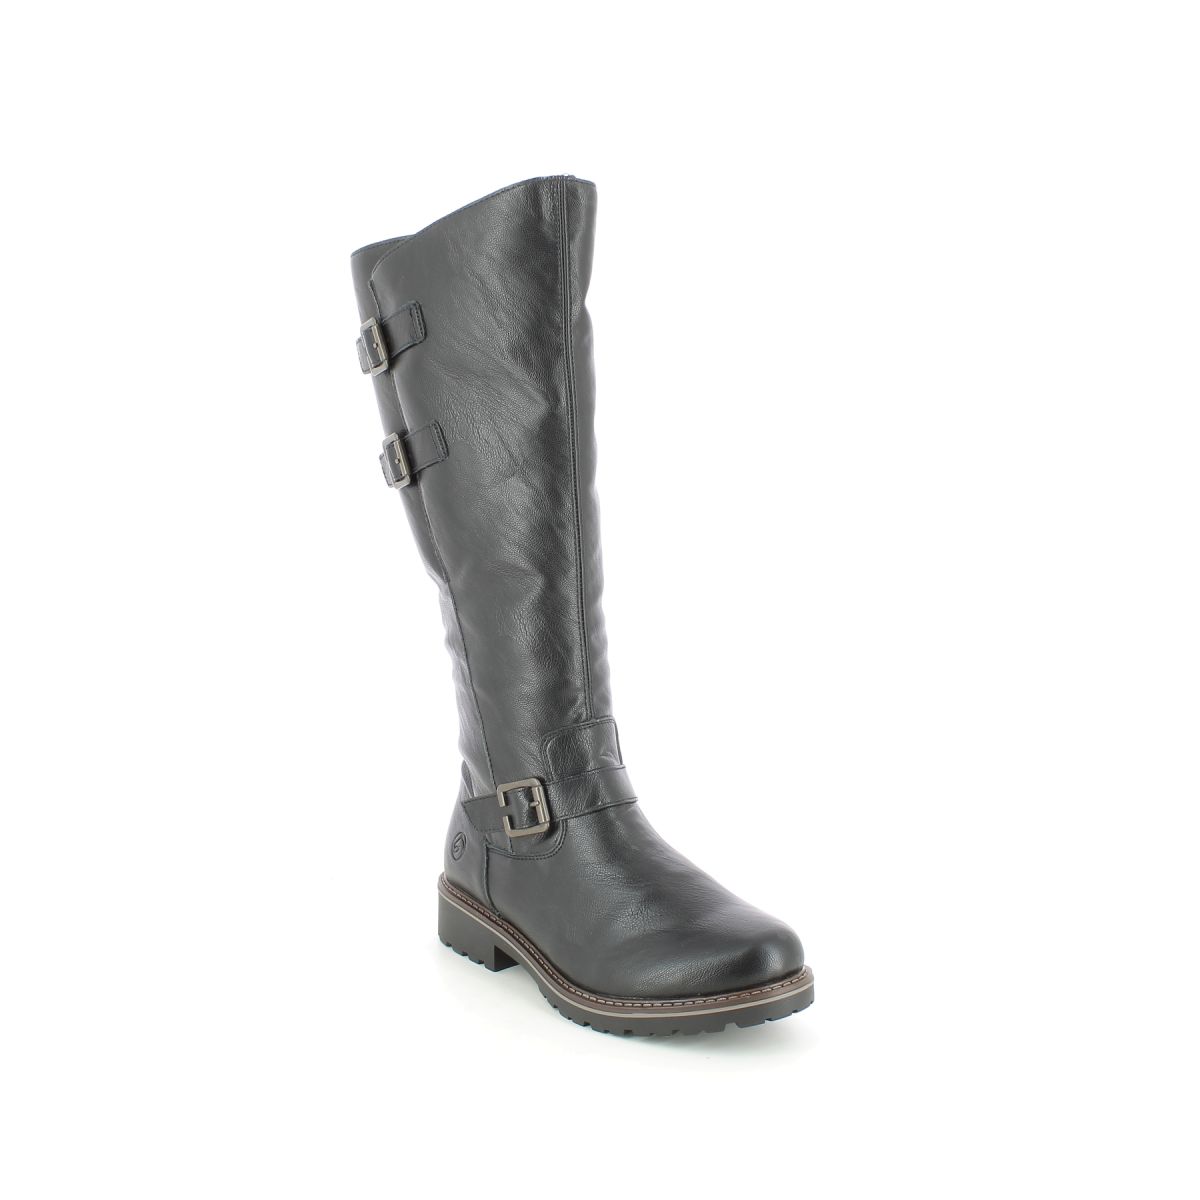 Remonte Indah Shearling Black Womens Knee-High Boots R6590-01 In Size 37 In Plain Black